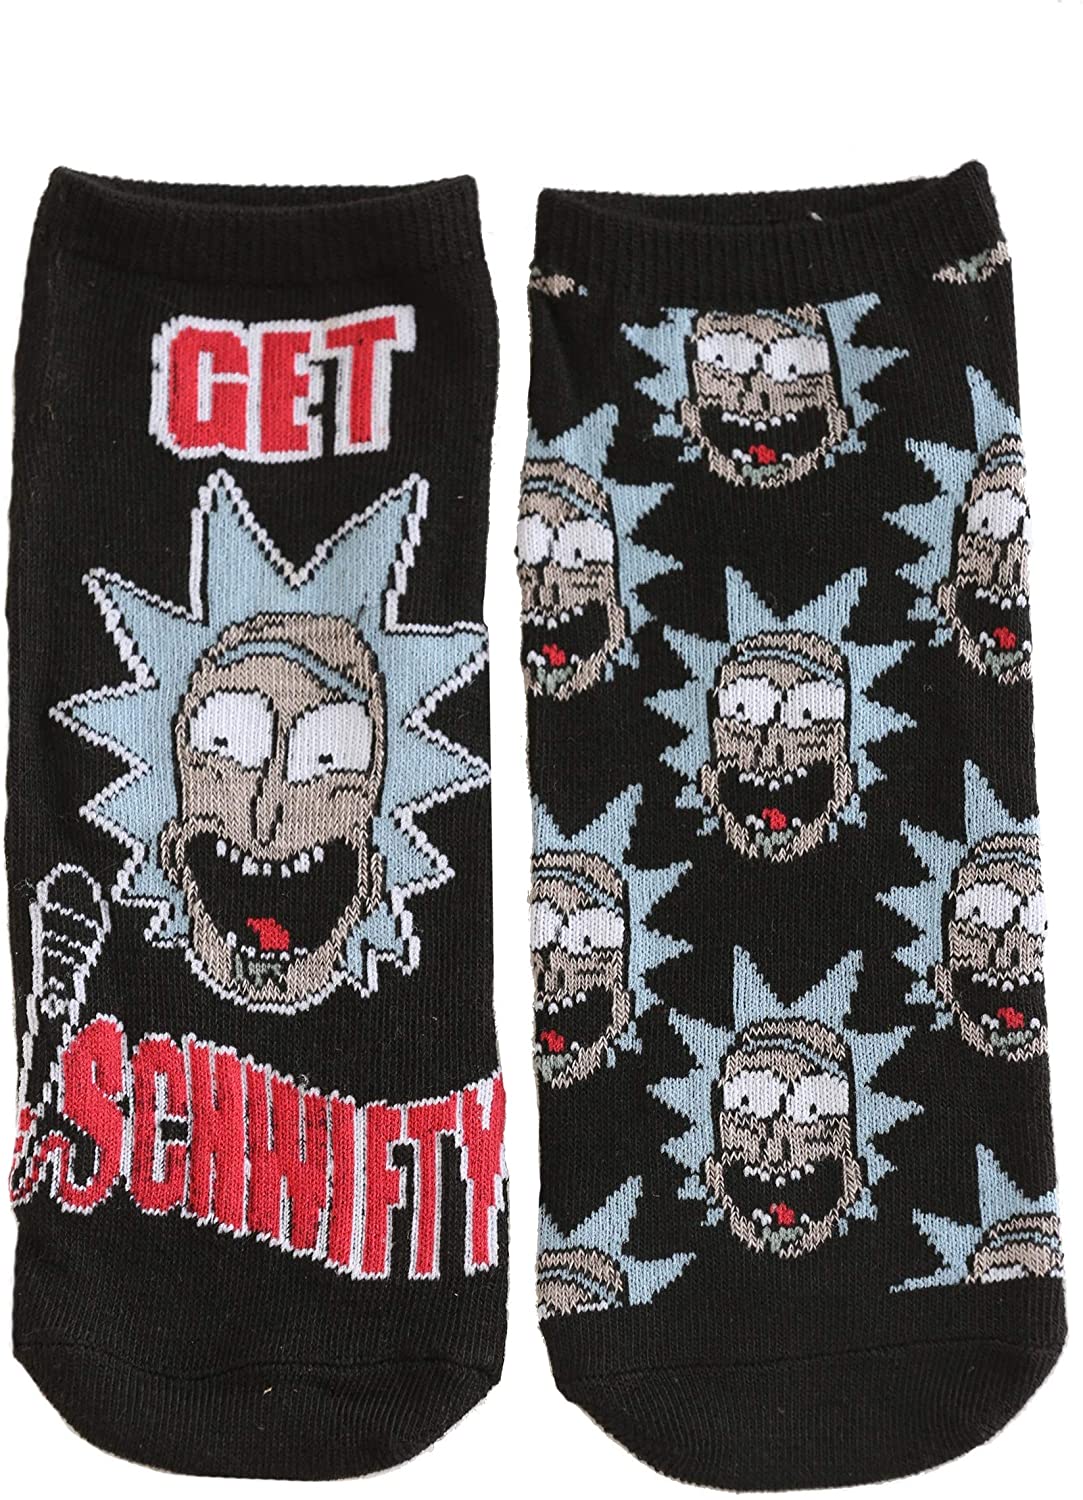 Rick and Morty Characters 5 Pair Pack Lowcut Womens Ankle Socks